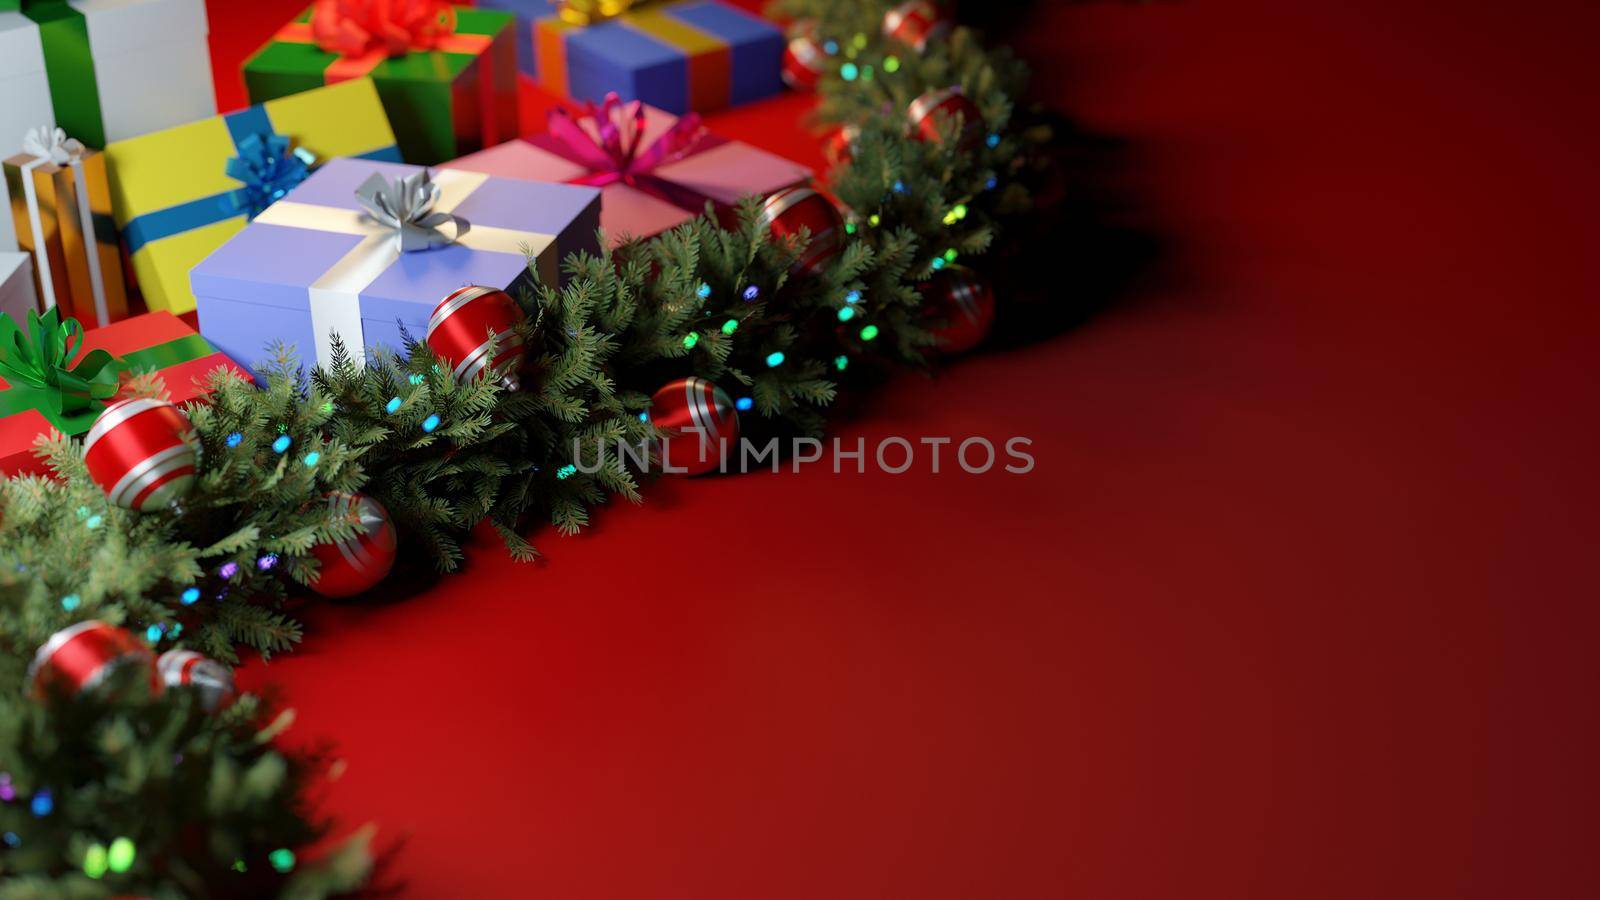 Christmas seasonal backdrop. Gift boxes and christmas garland with baubles on red background. Digital 3D render.